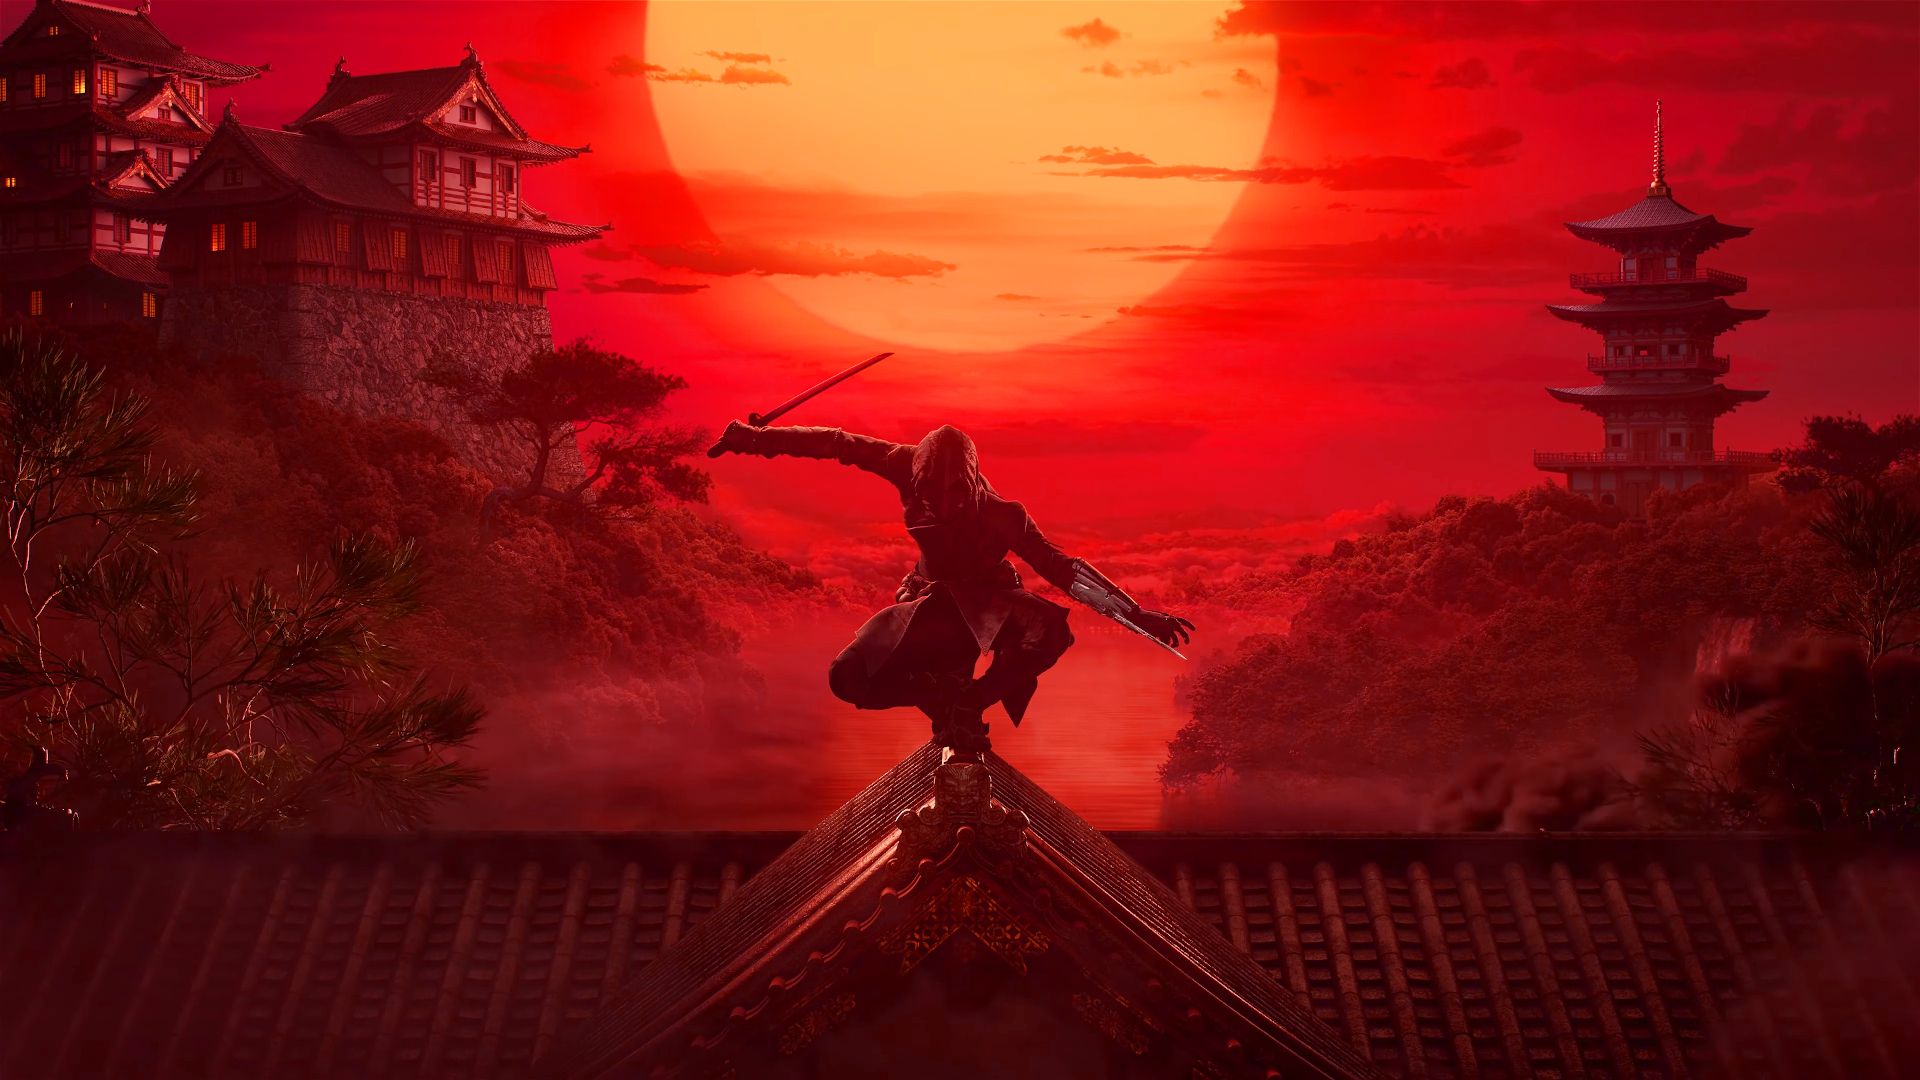 The end of the Assassin's Creed Red teaser shows an assassin on top of an Japanese building in the past with a red sky behind them and the sun hovering above the character.